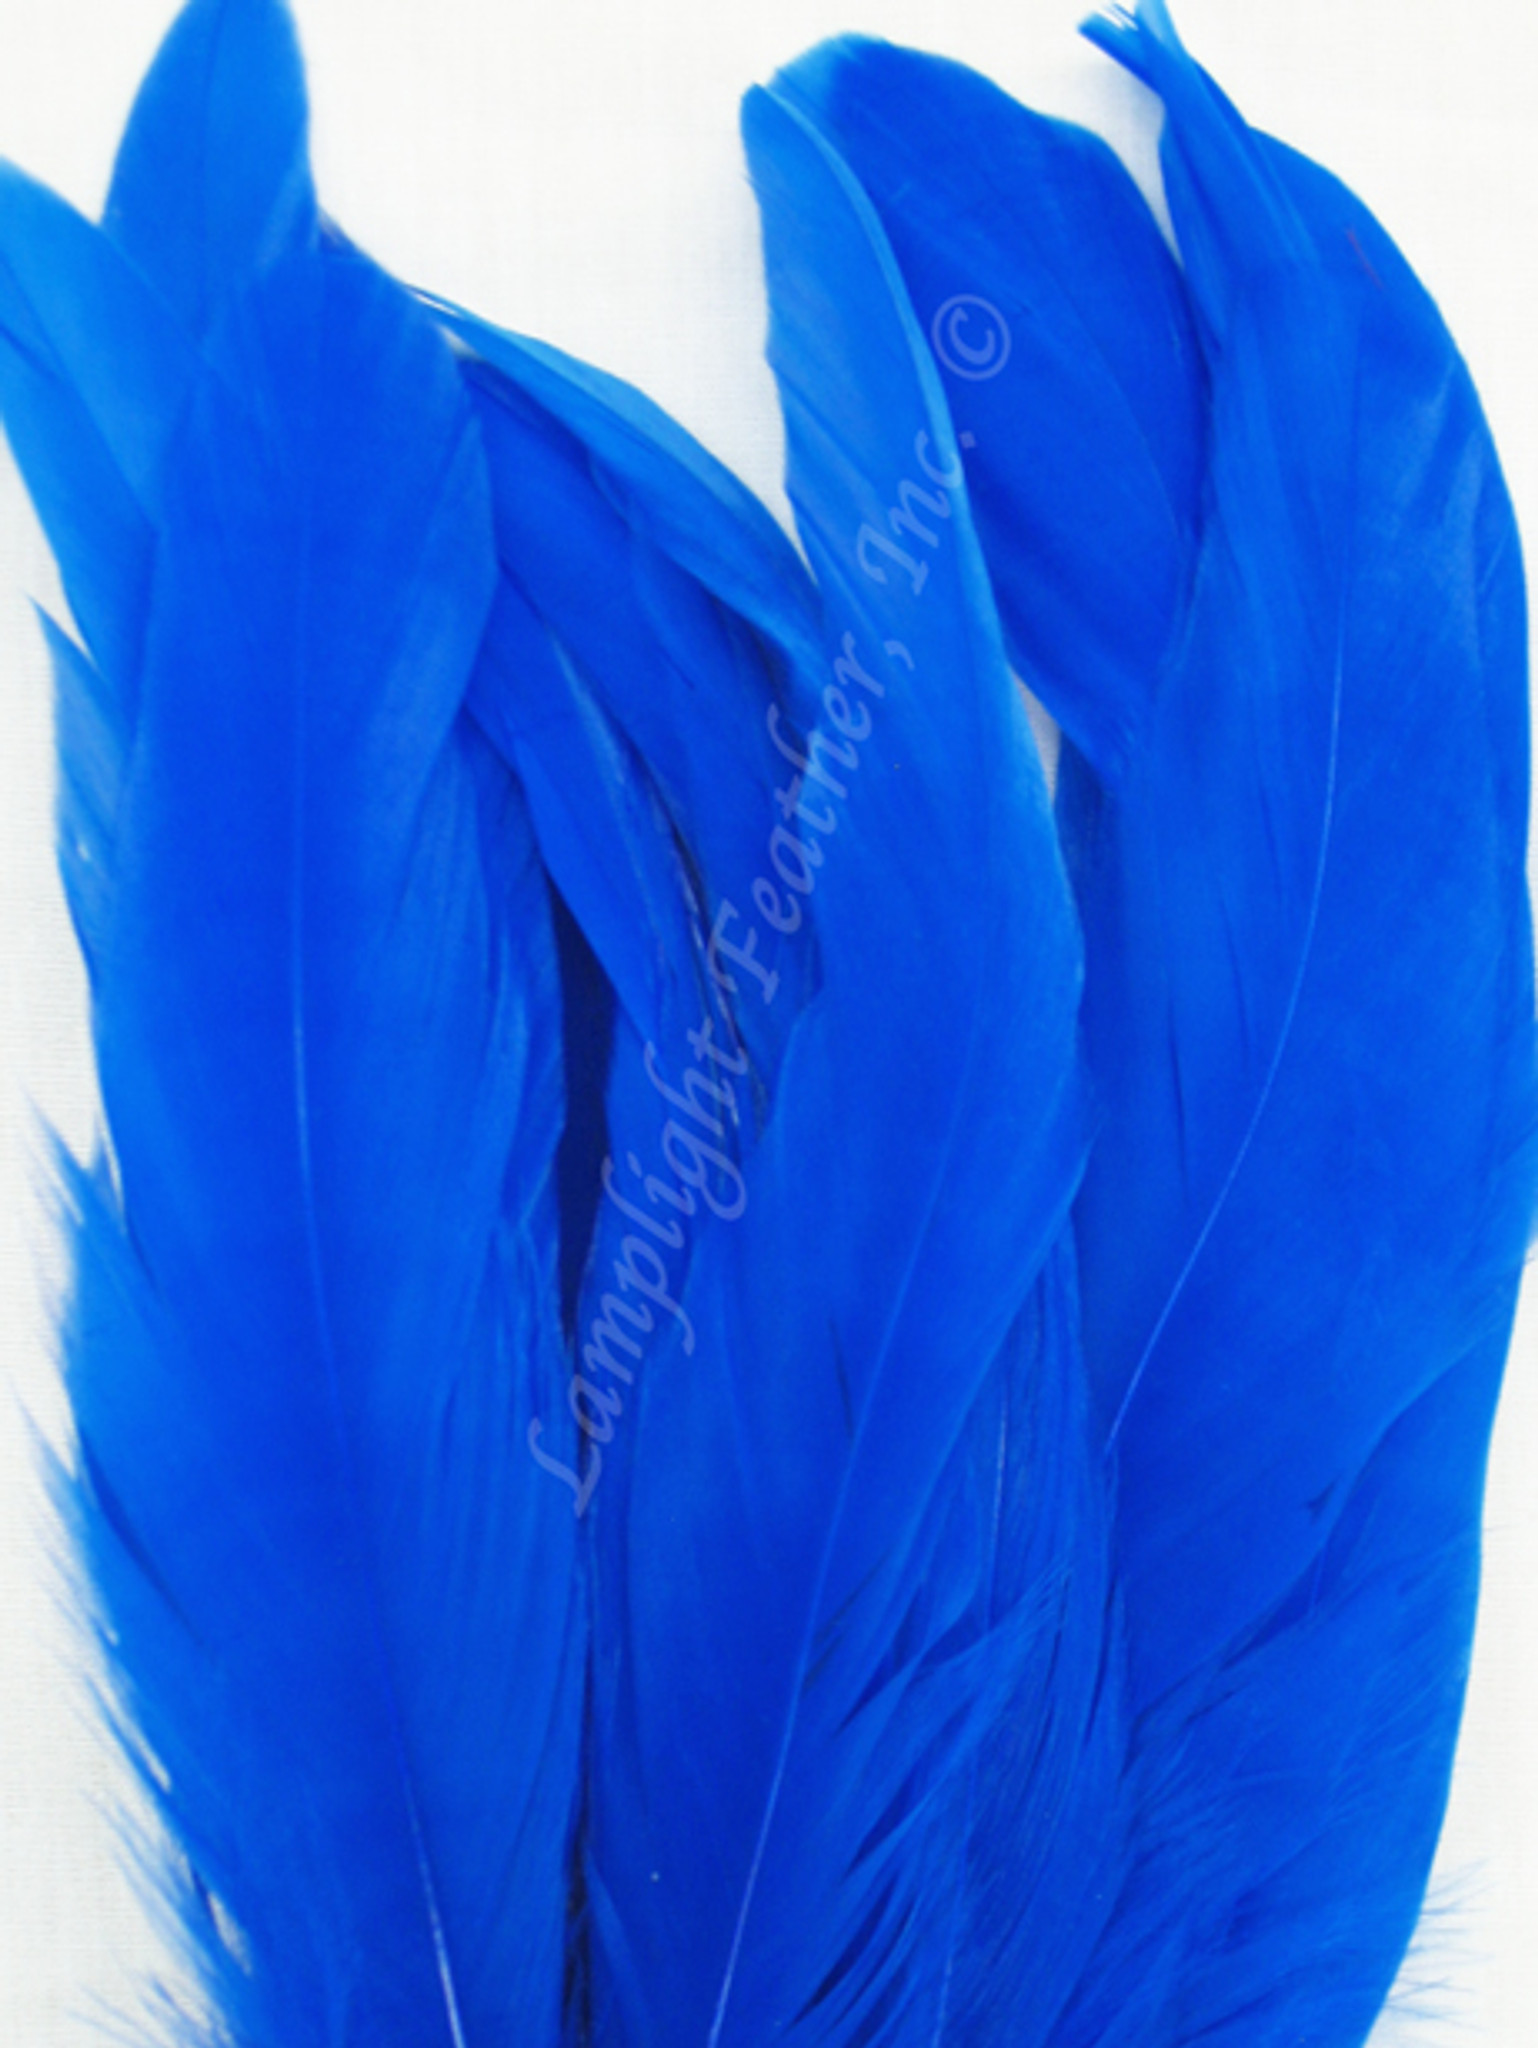 Blue Coque Rooster Tail Feathers 6-8 inch per ounce